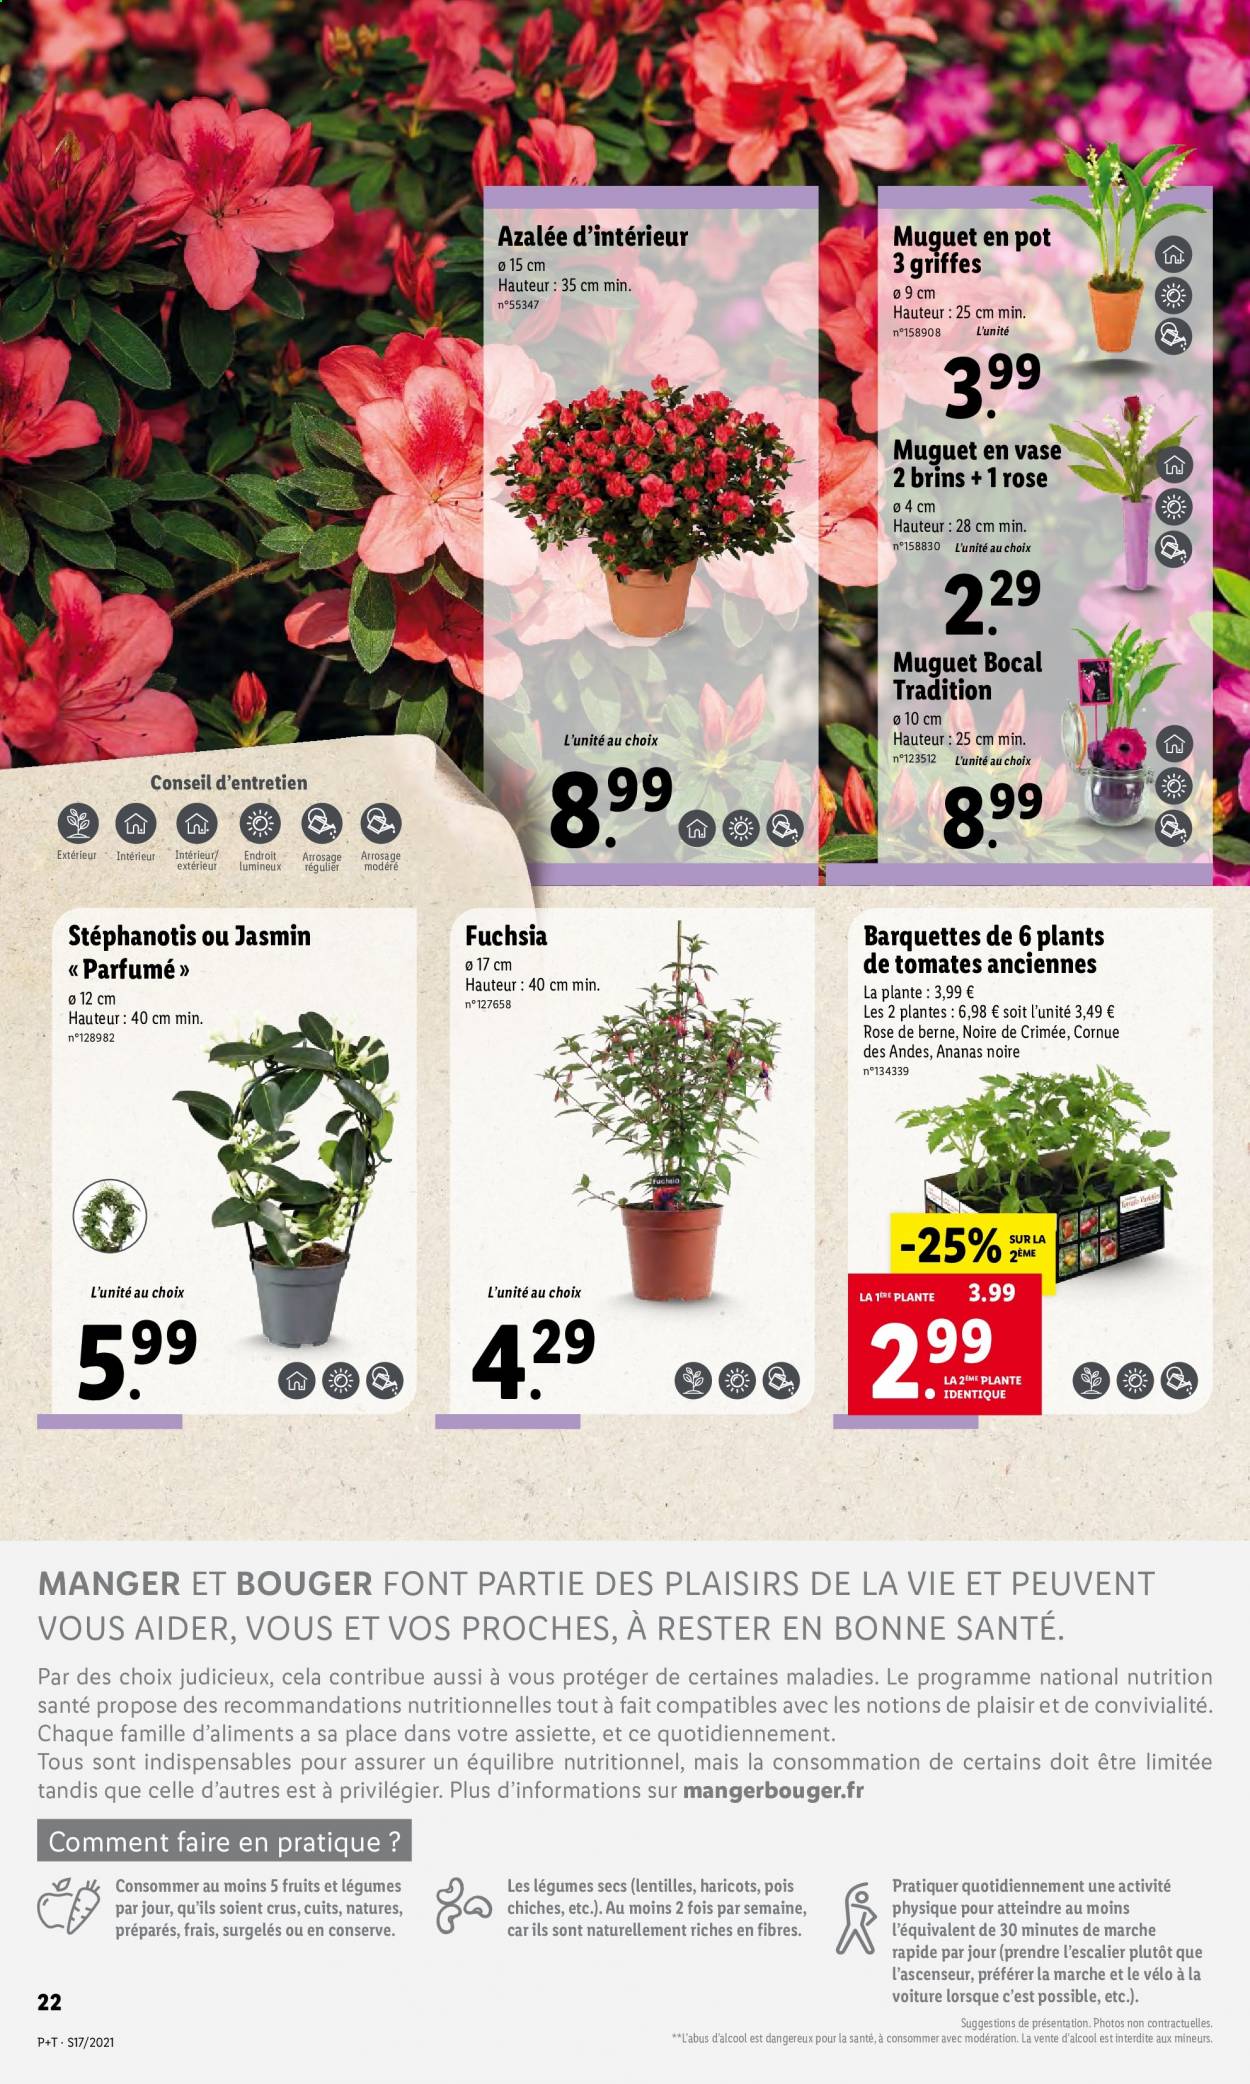 Catalogue Lidl - 28.04.2021 - 04.05.2021. Page 26.